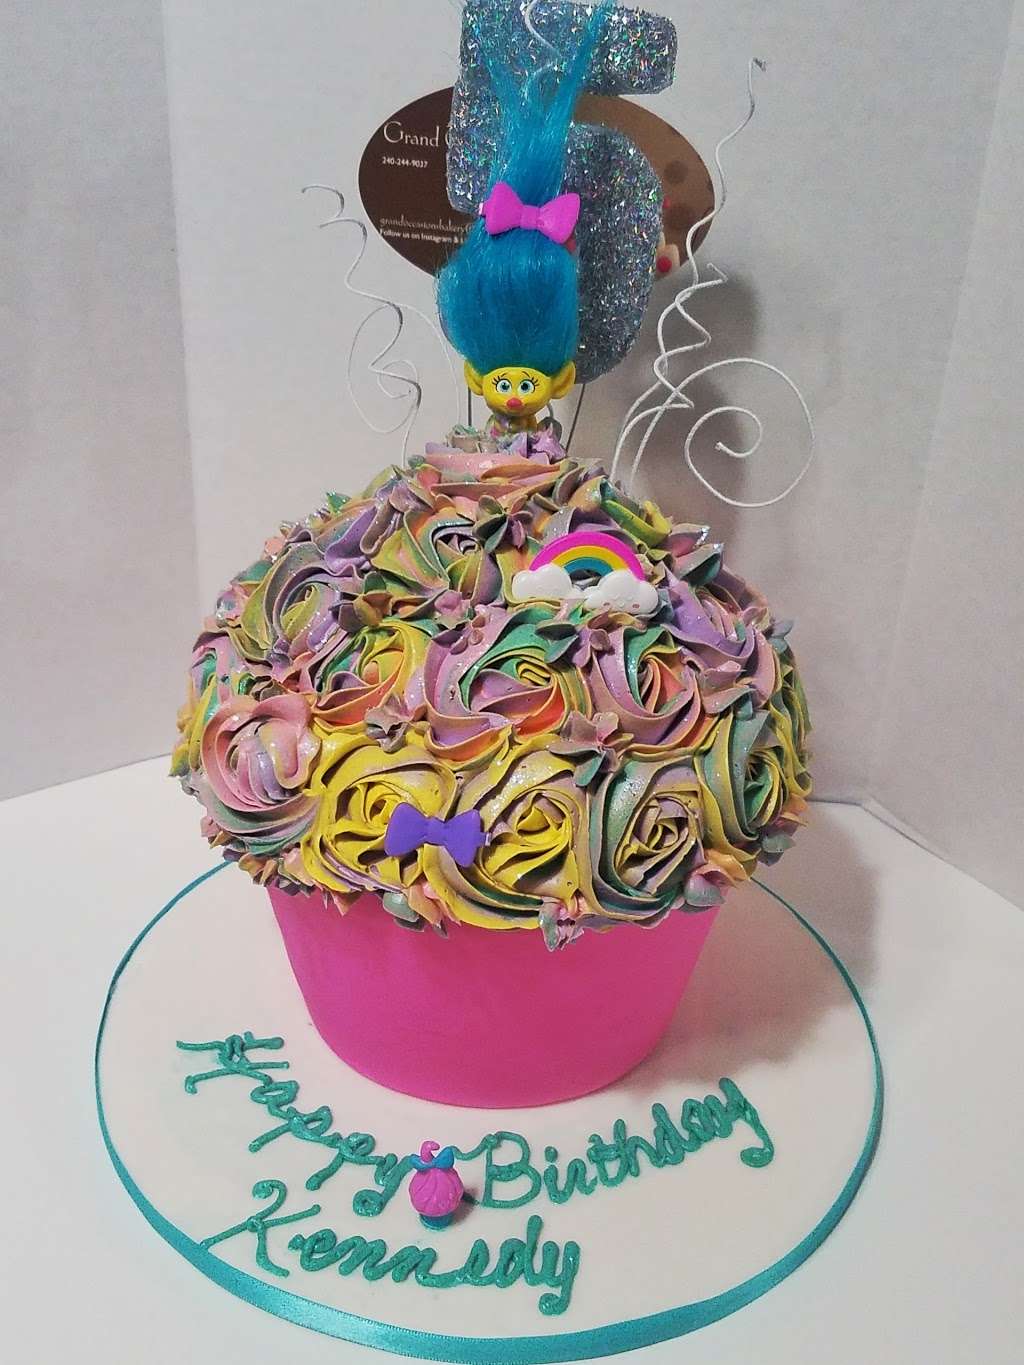 Grand Occasions Bakery | 857 Lacewood Terrace, Landover, MD 20785 | Phone: (240) 244-9037